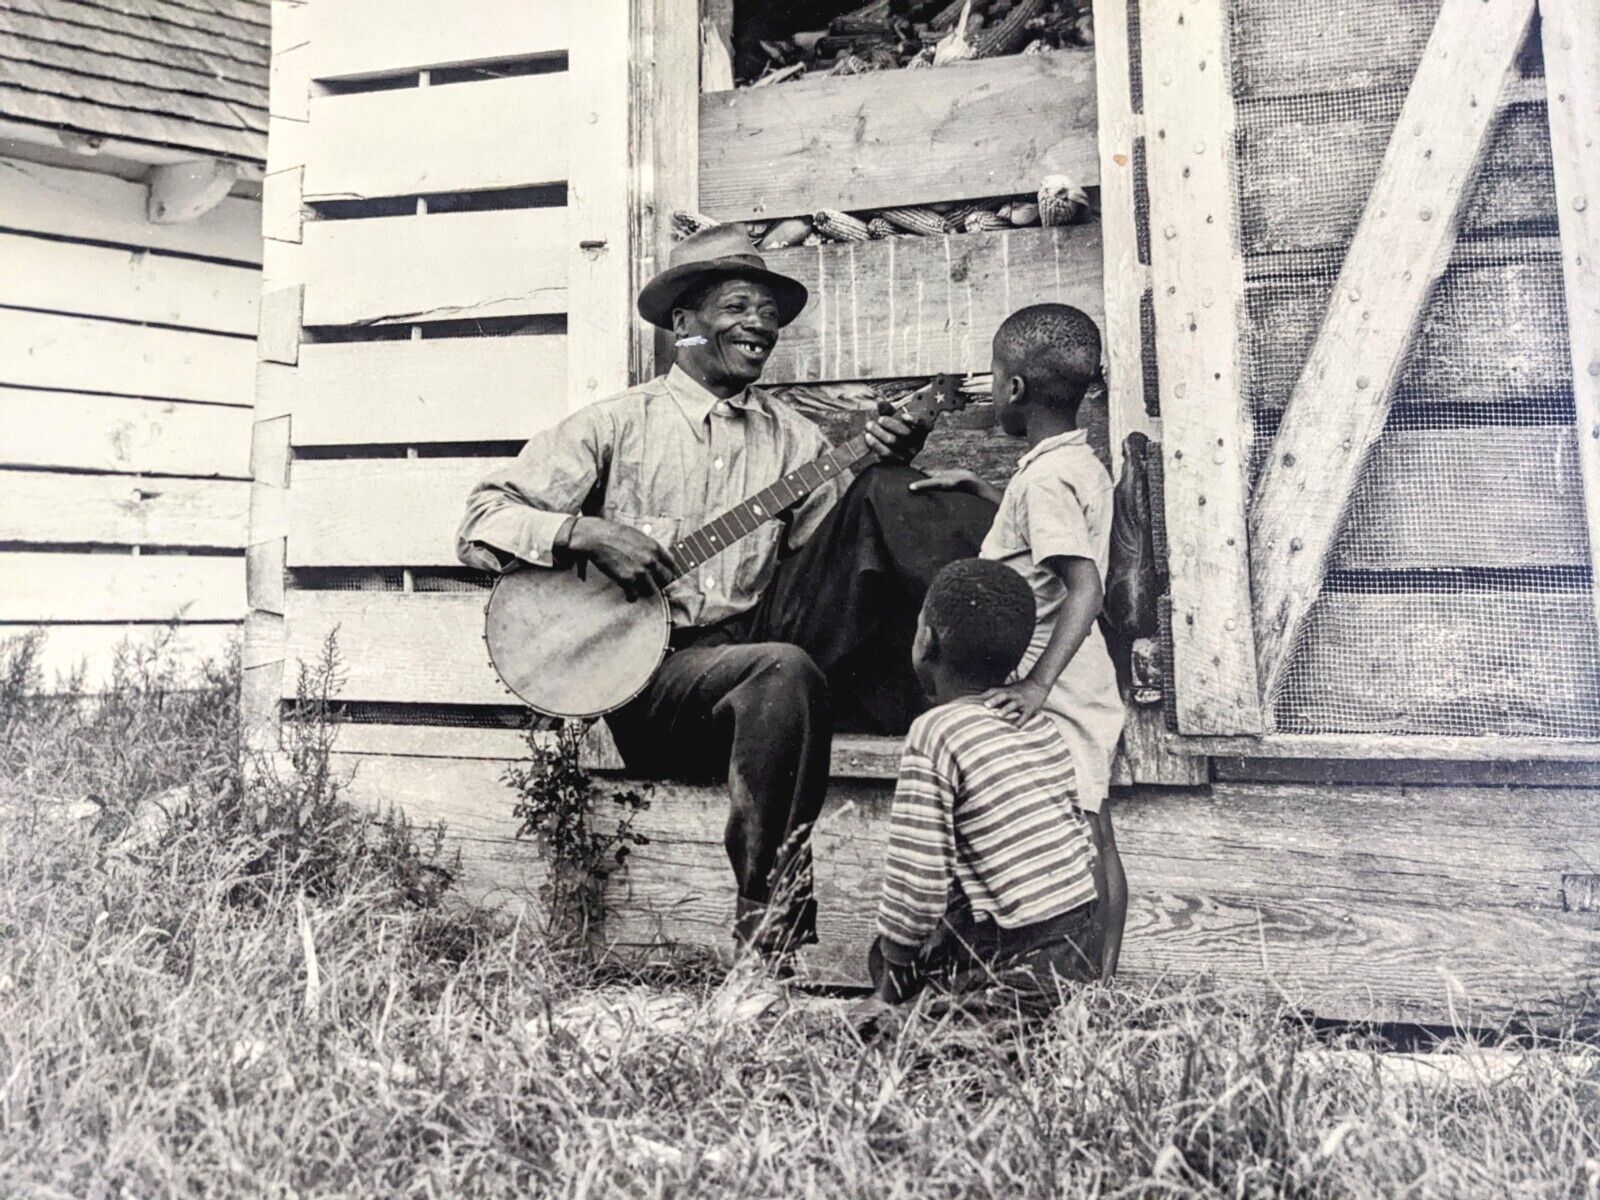 Vtg 1949 Art Photograph African American Banjo Player Children by Caryl Firth  